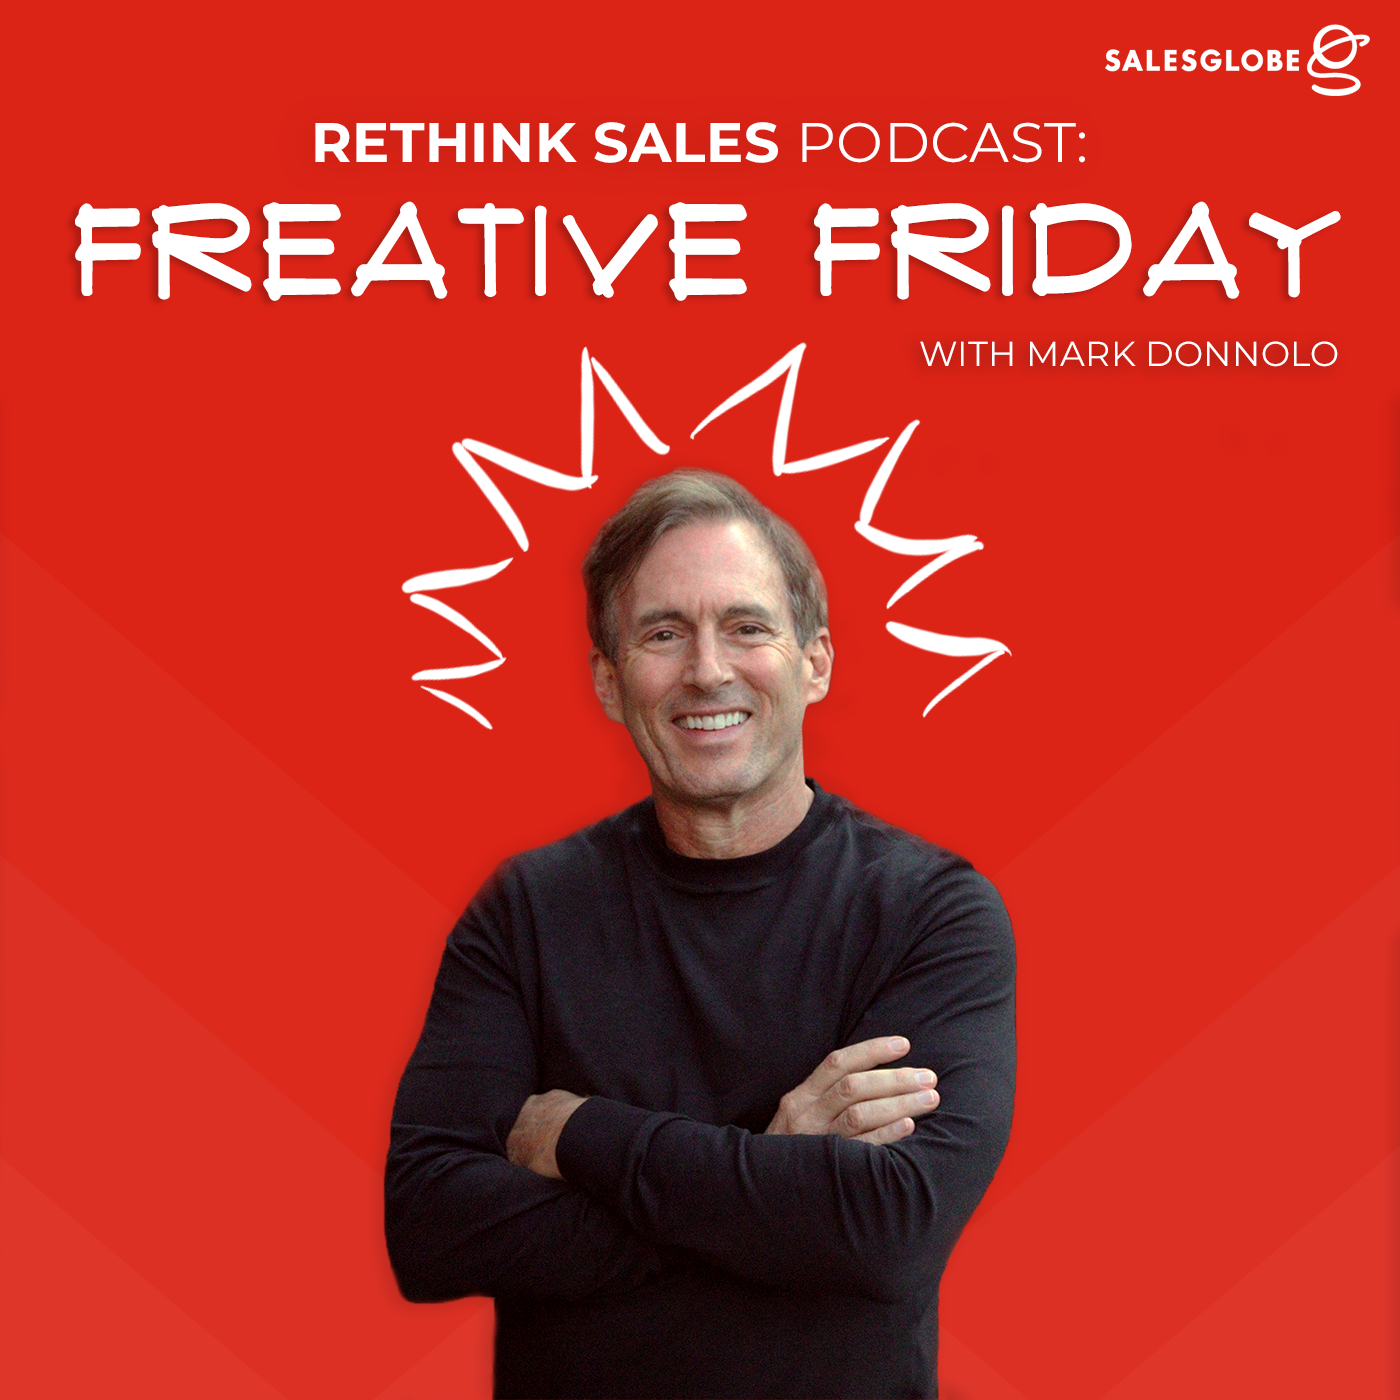 96: Freative Friday - Insight in Your Hunt for The Revenue Roadmap Pt 2